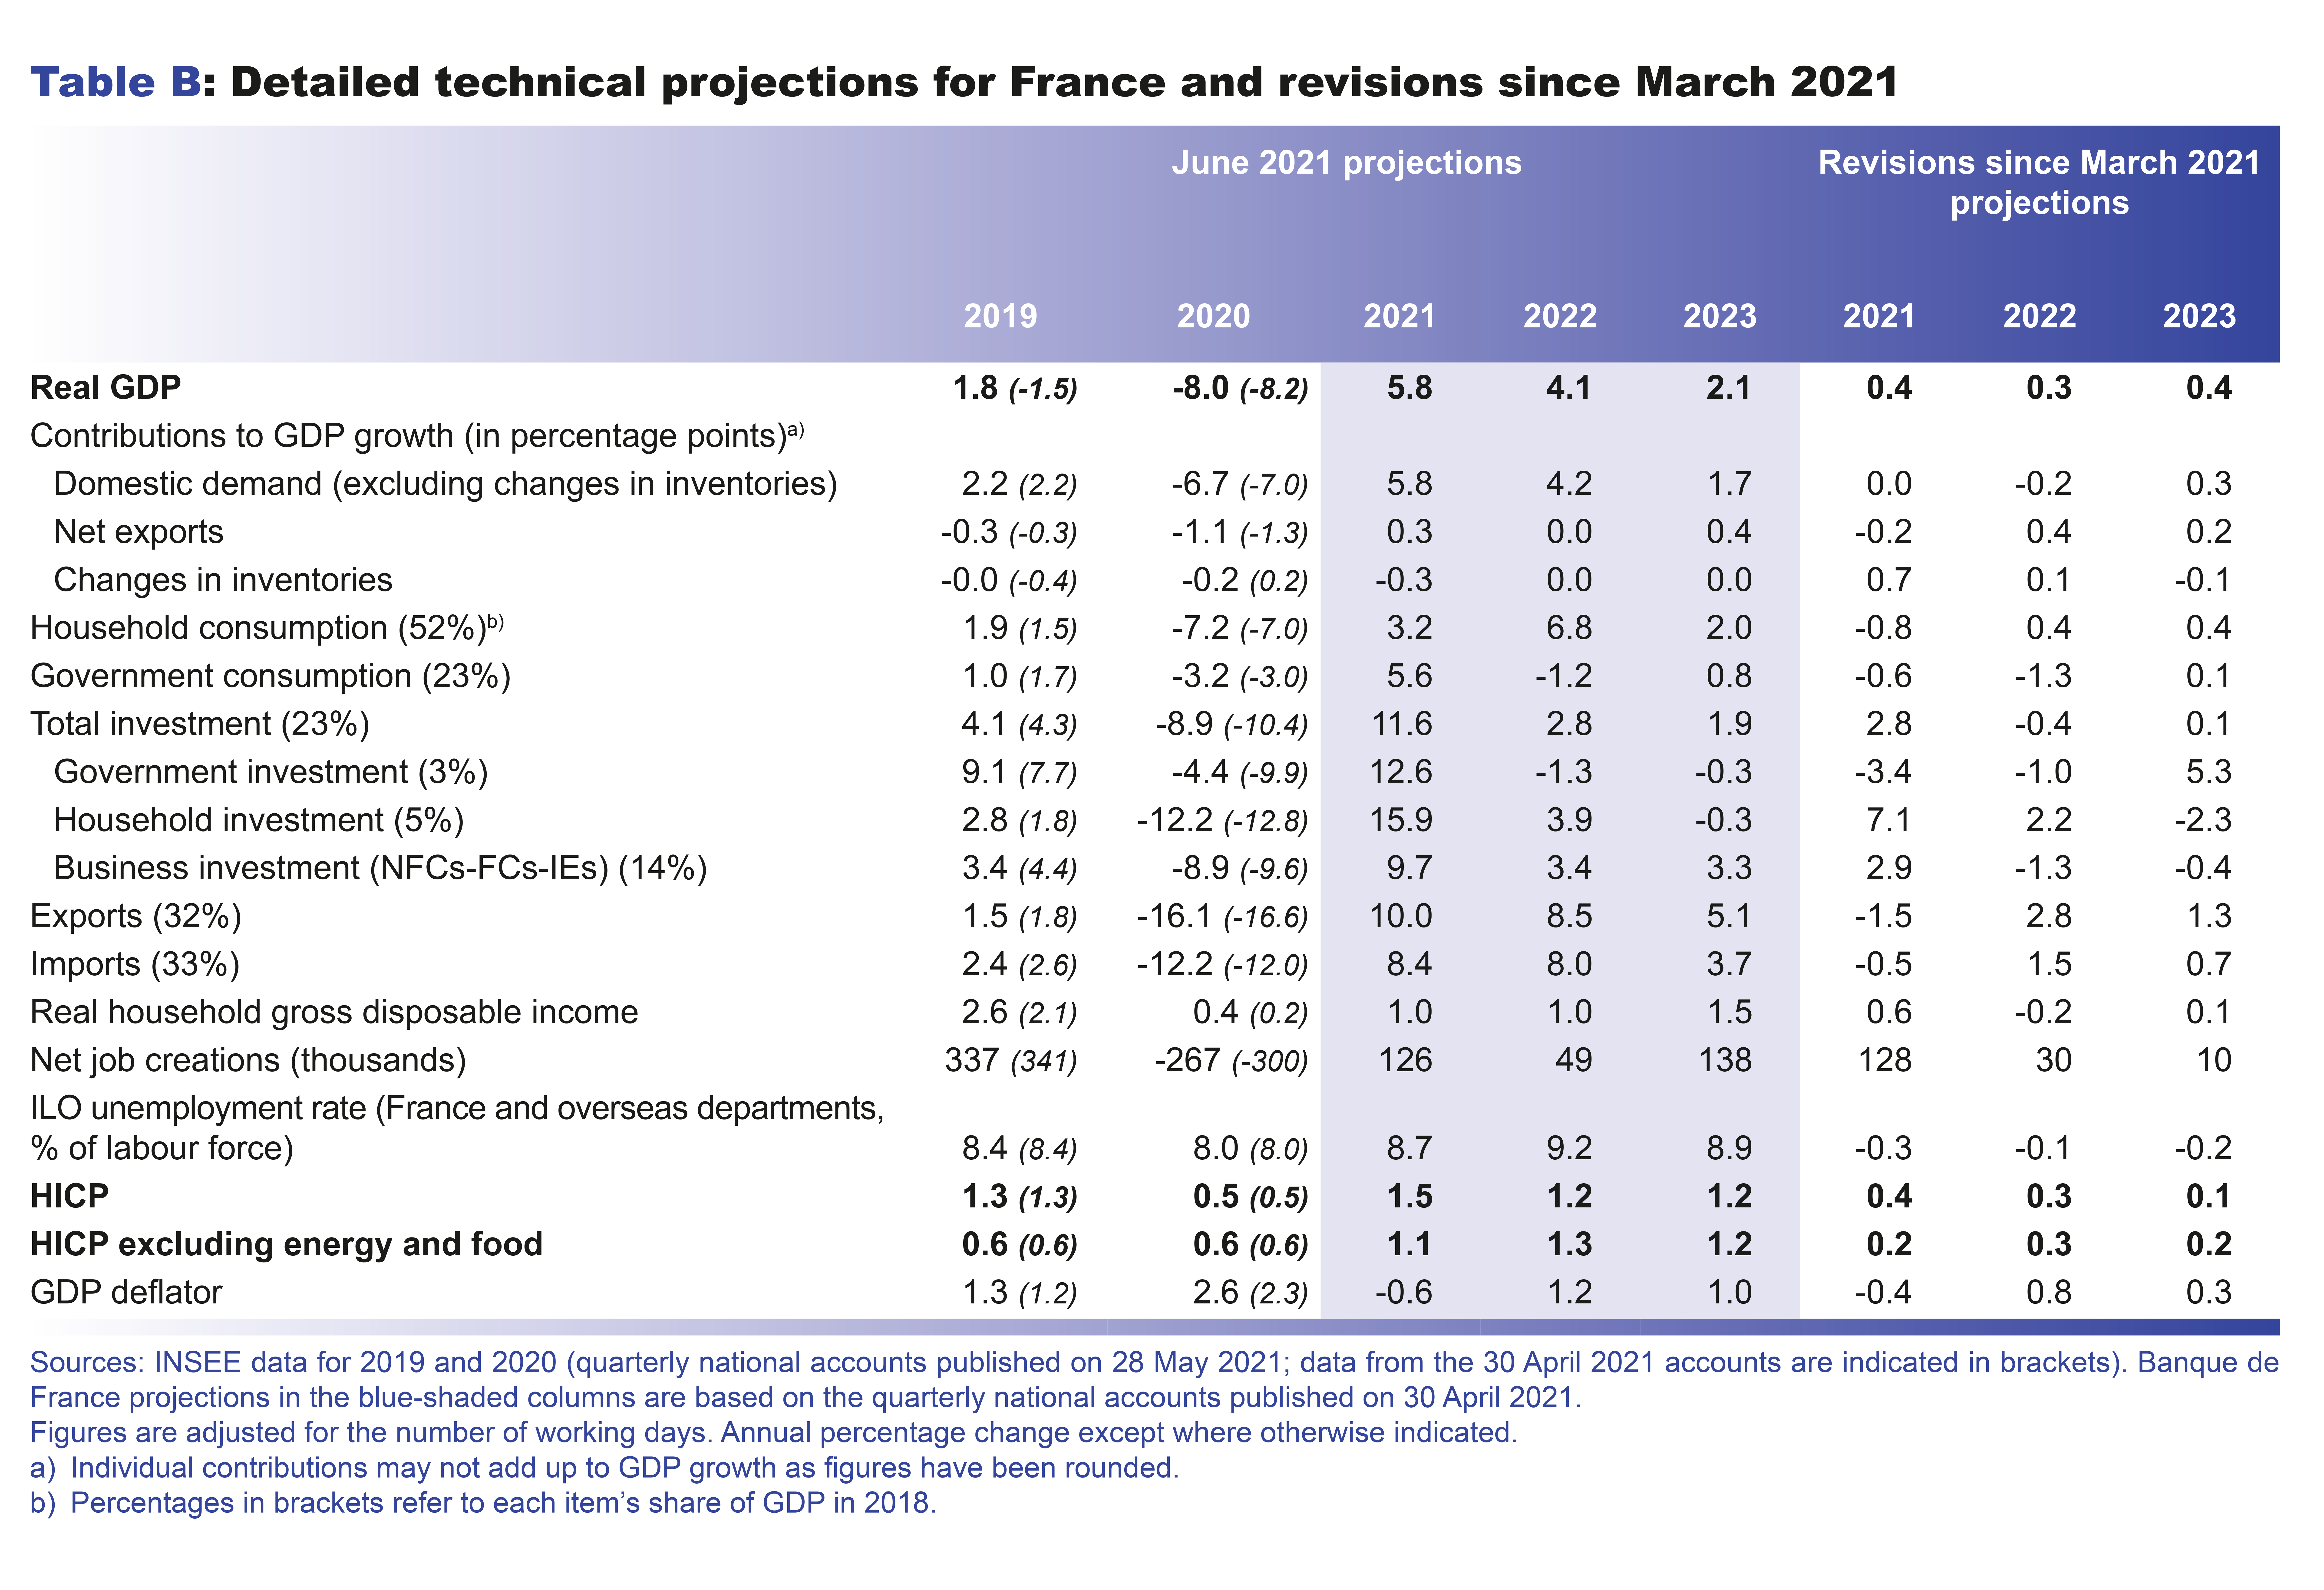 Macroeconomic projections – June 2021 - Detailed technical projections for France and revisions since March 2021